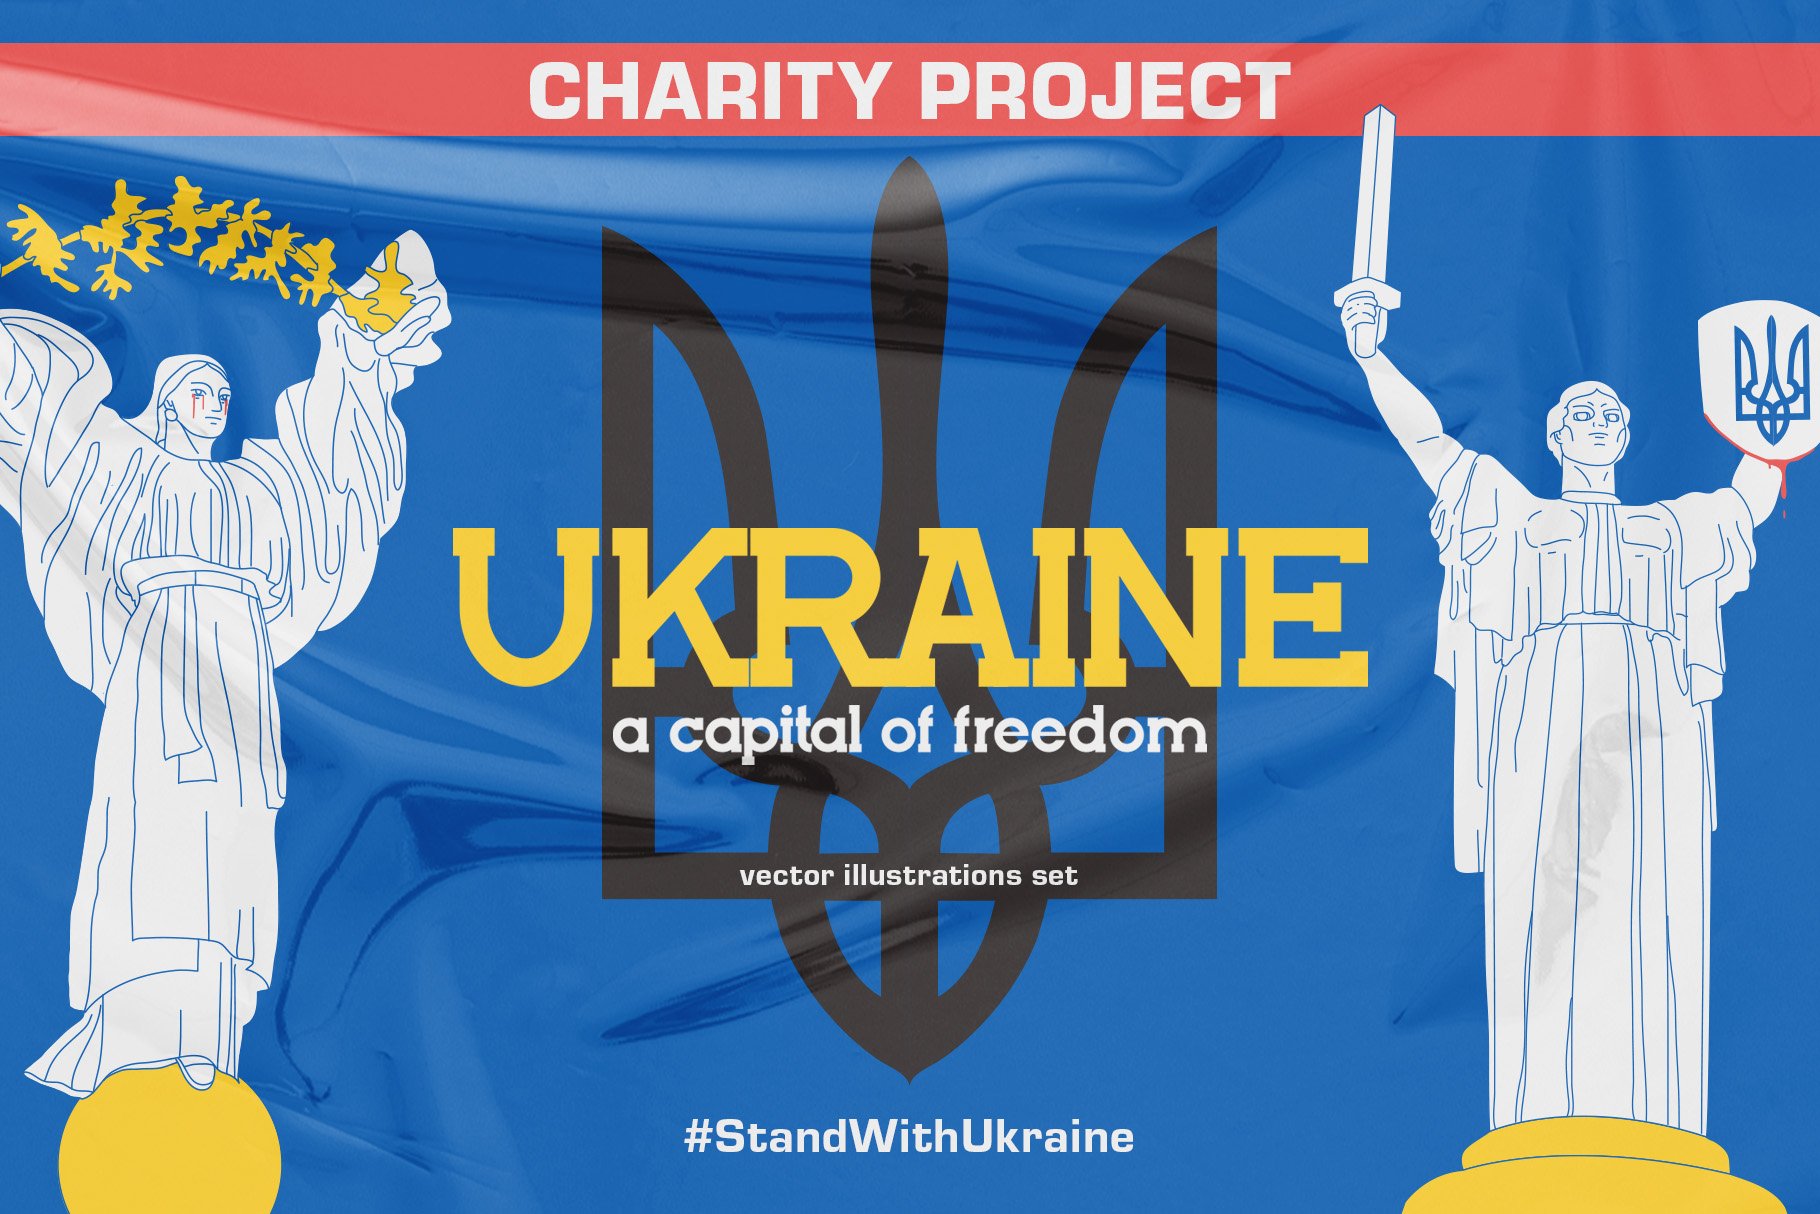 Ukraine - a capital of FREEDOM cover image.